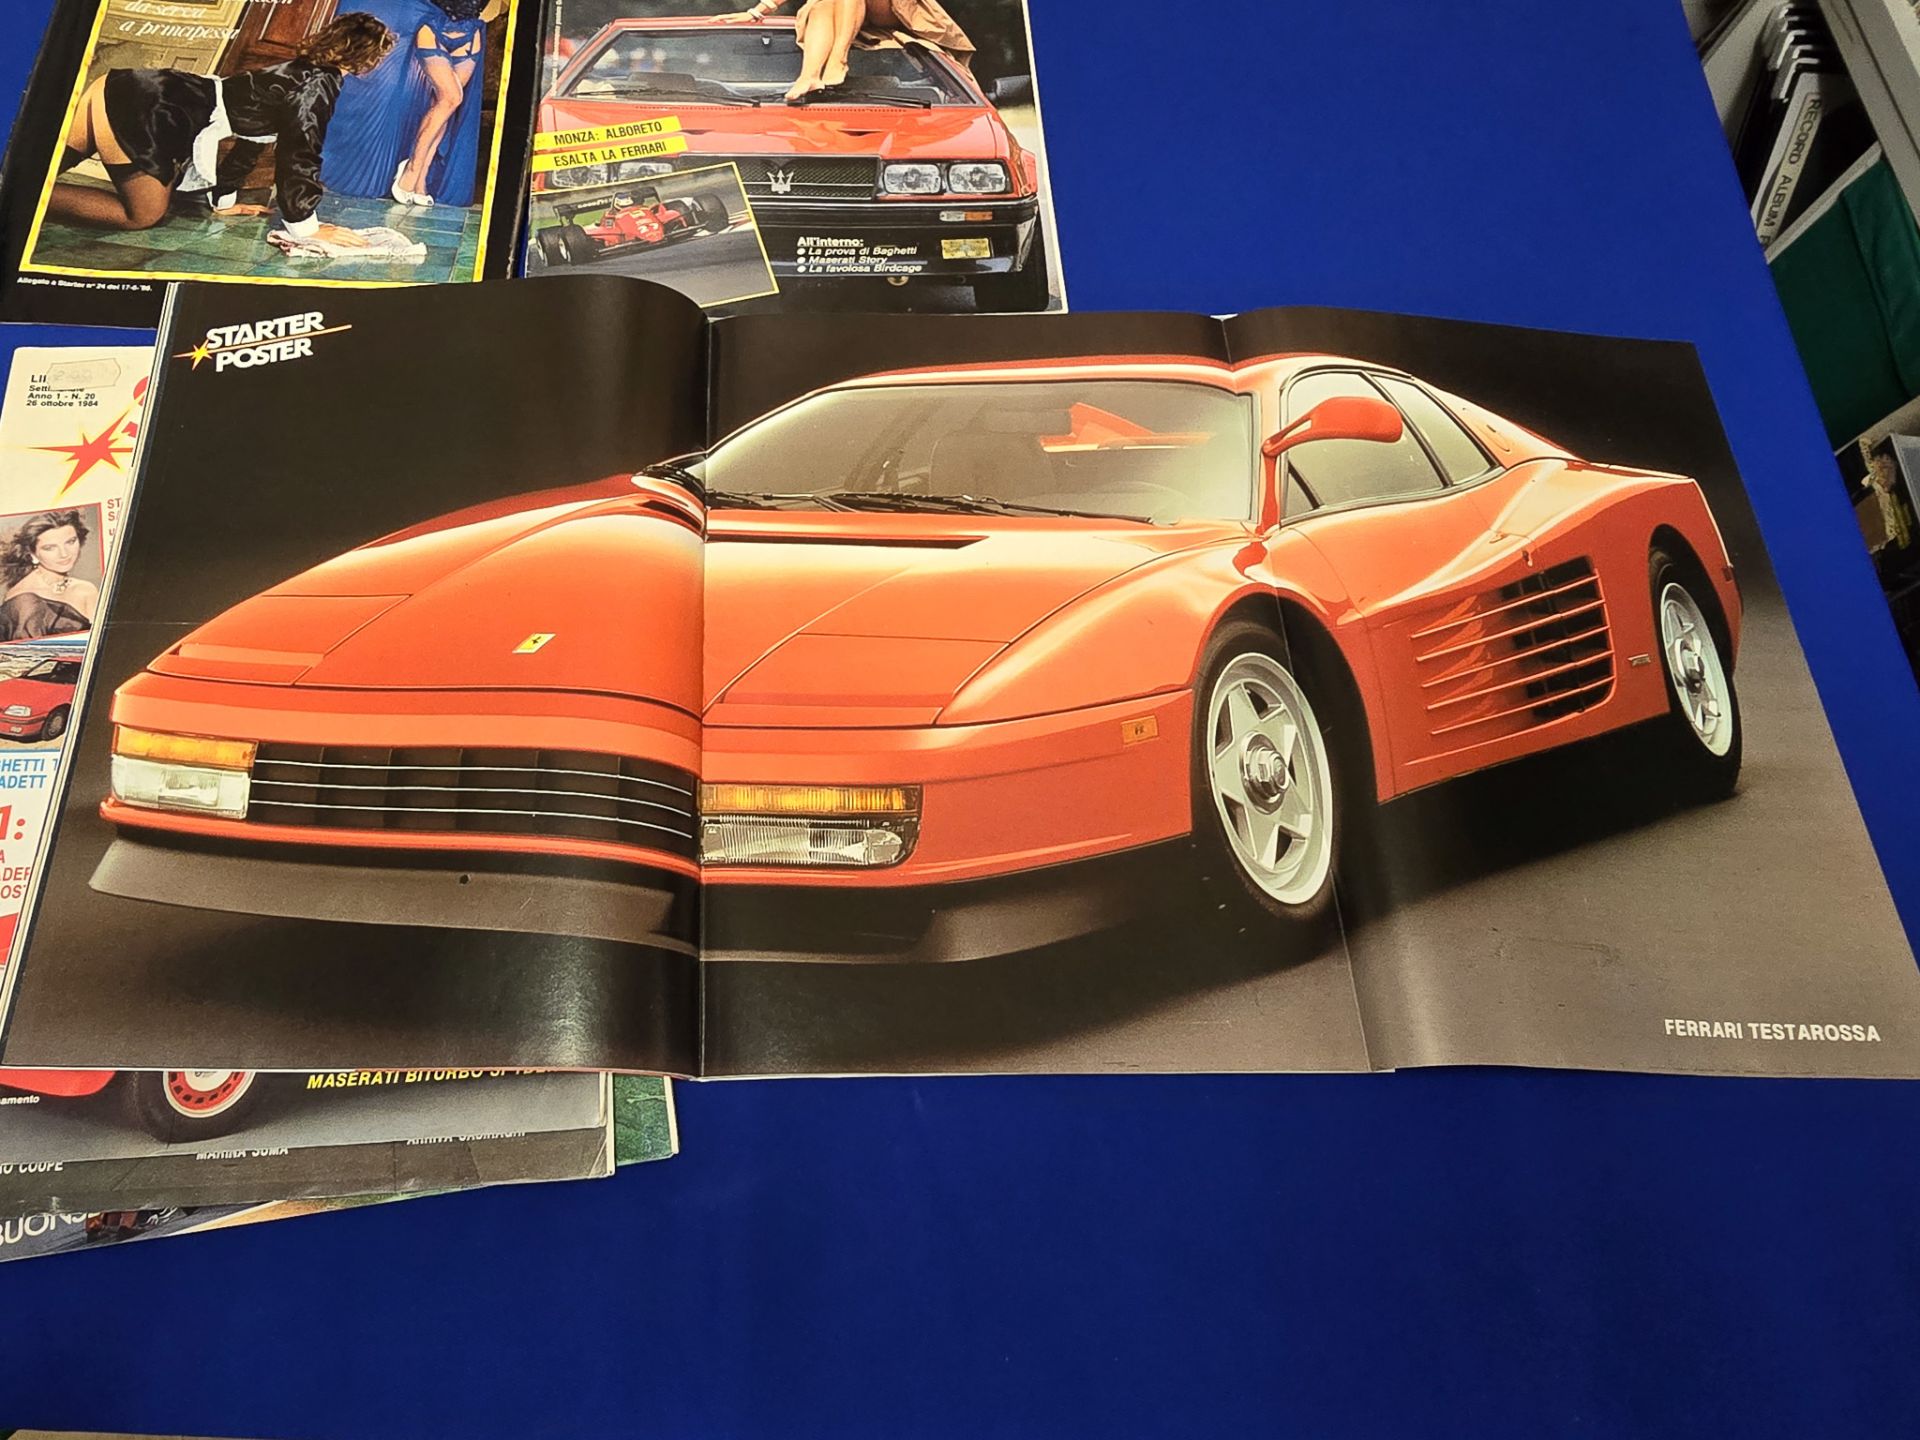 Large Collection of Starter Magazines Italian Cars and Glamour Ladies Ferrari alpha etc - Image 13 of 17